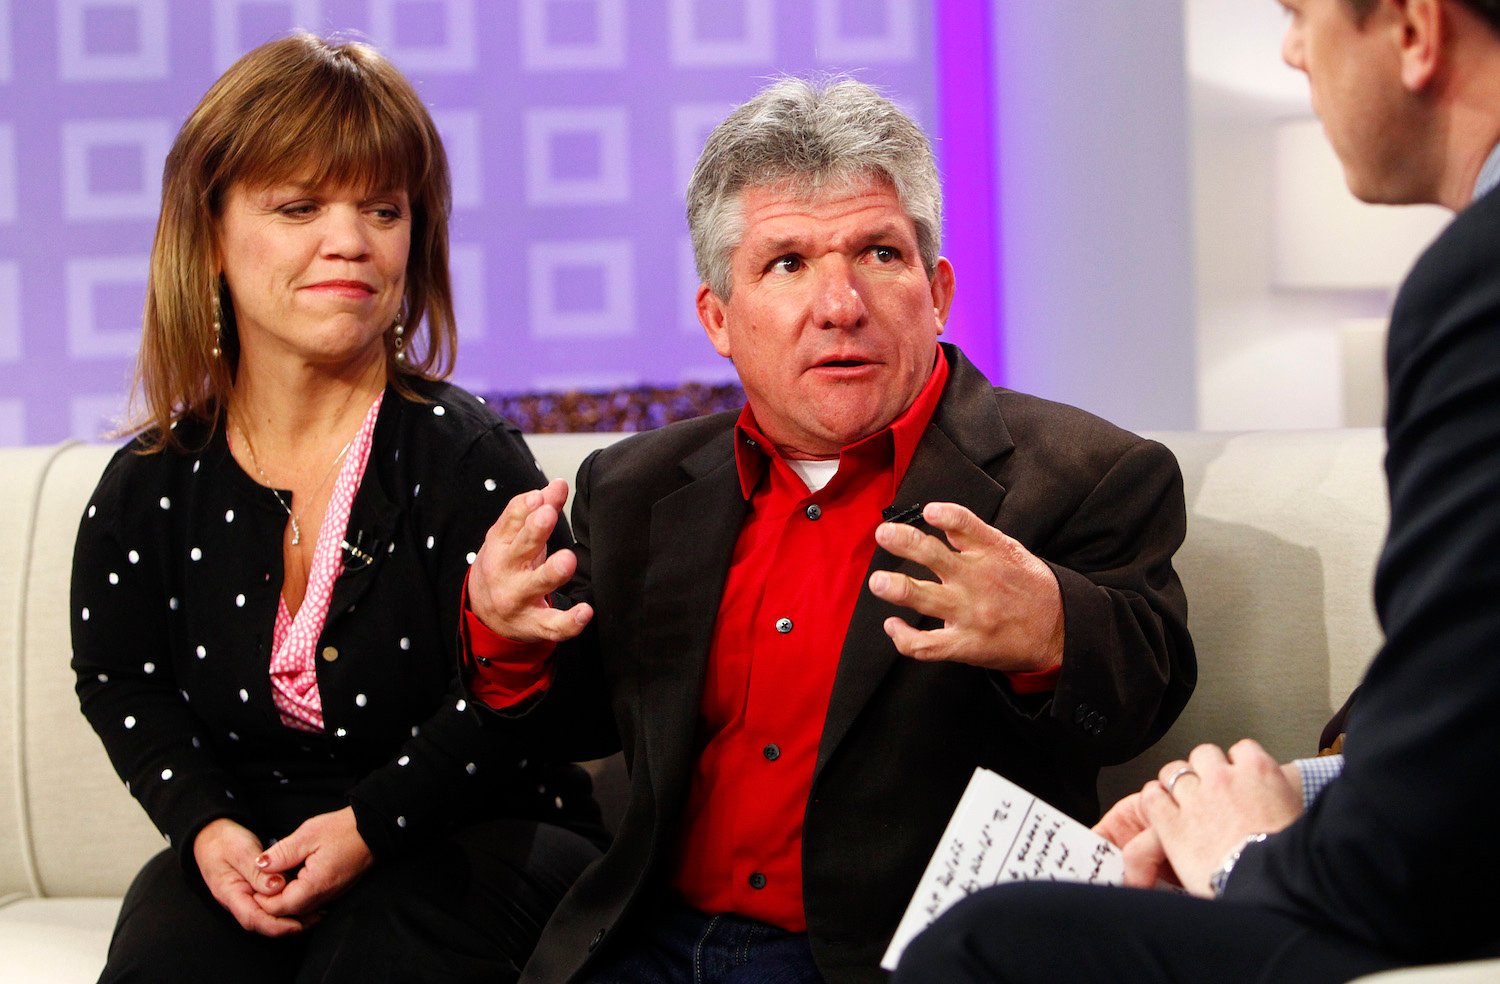 Amy Roloff and Matt Roloff from 'Little People, Big World' talking to an interviewer